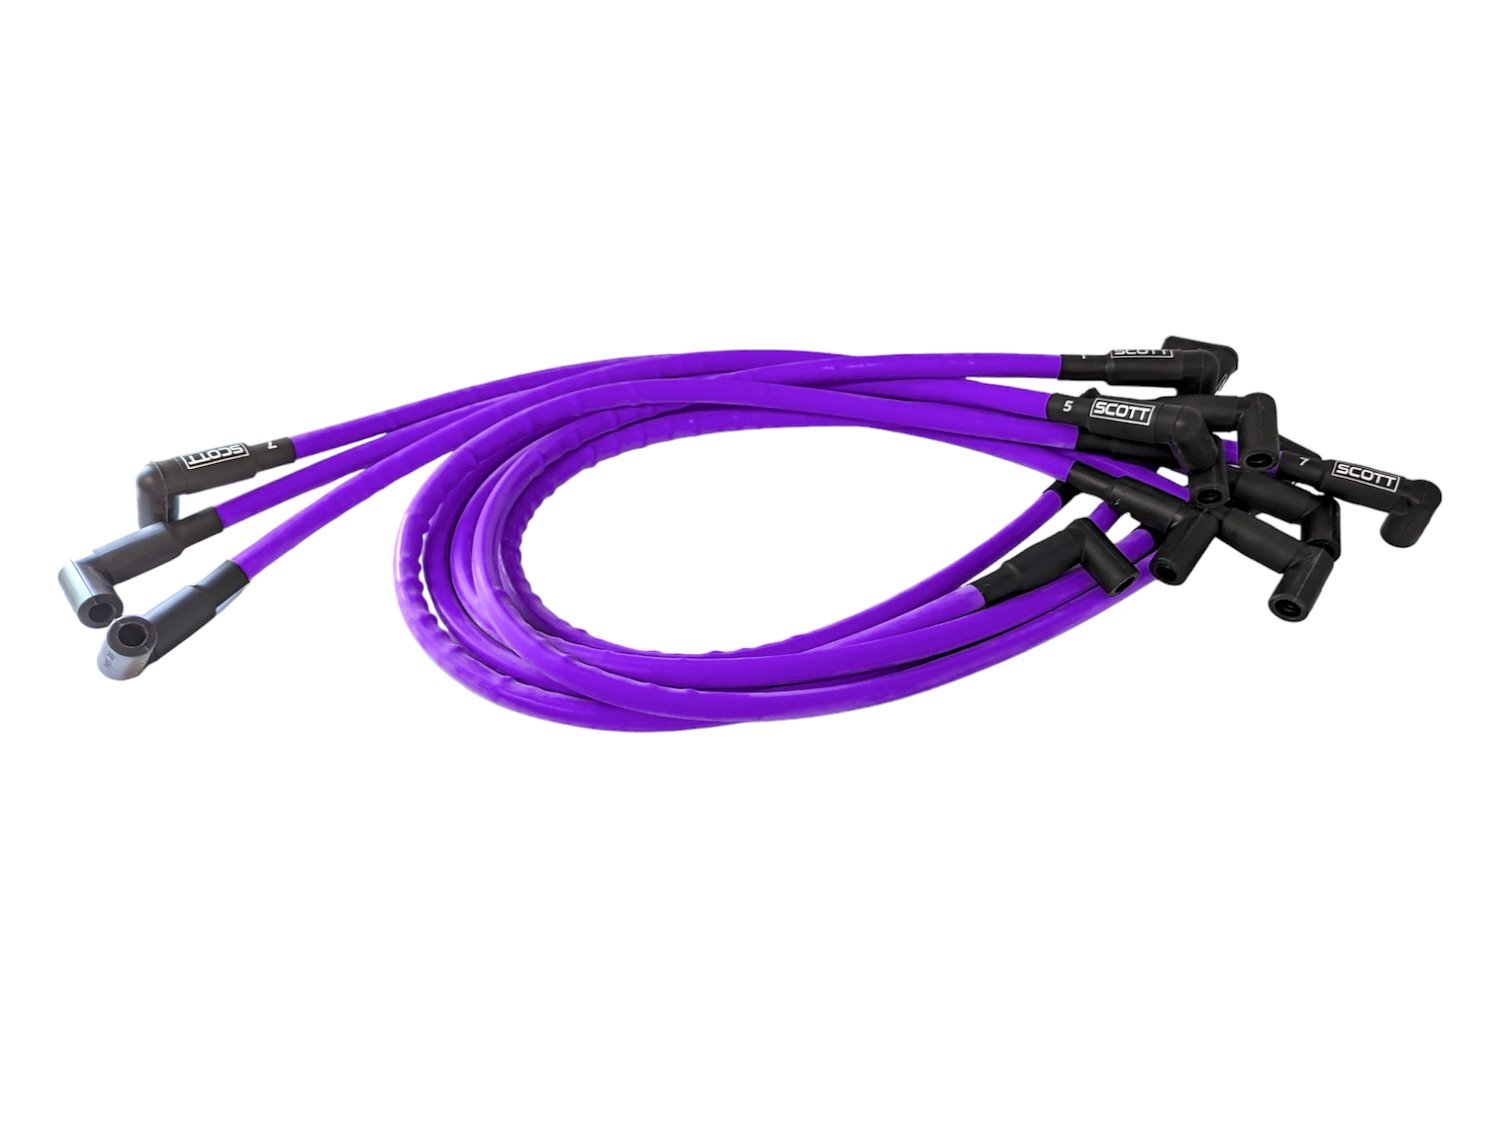 SPW-CH-407-6 High-Performance Silicone-Sleeved Spark Plug Wire Set for Small Block Chevy, Under Header [Purple]